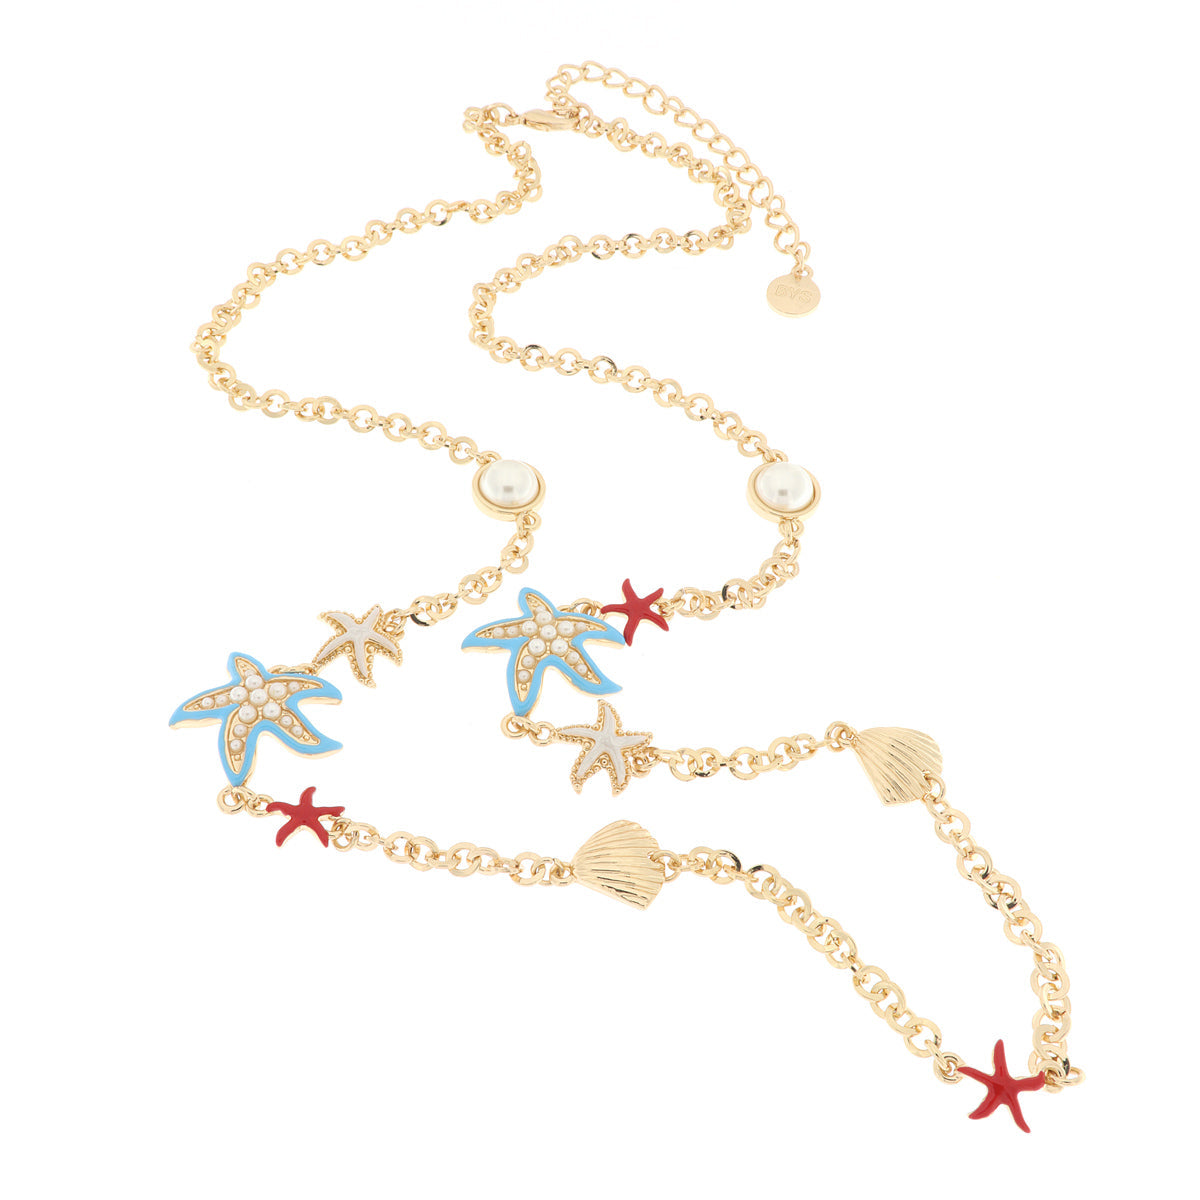 Necklace with Starfish and Shells